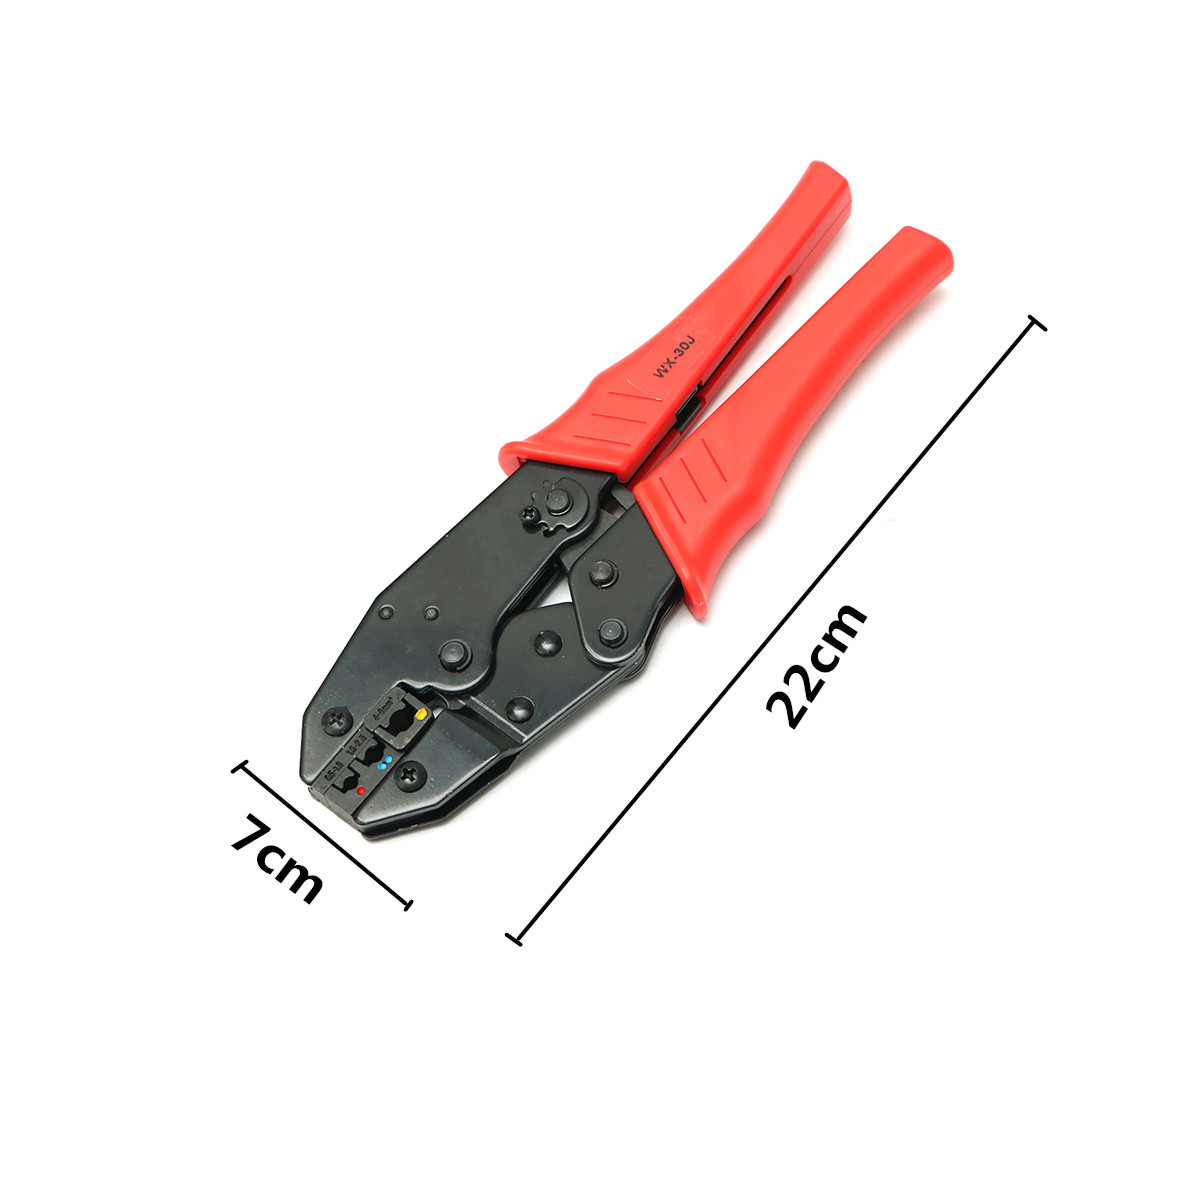 05-6mmsup2-Heavy-Duty-Ratchet-Crimping-Plier-Wire-Cable-Crimper-Electricians-Tool-1195956